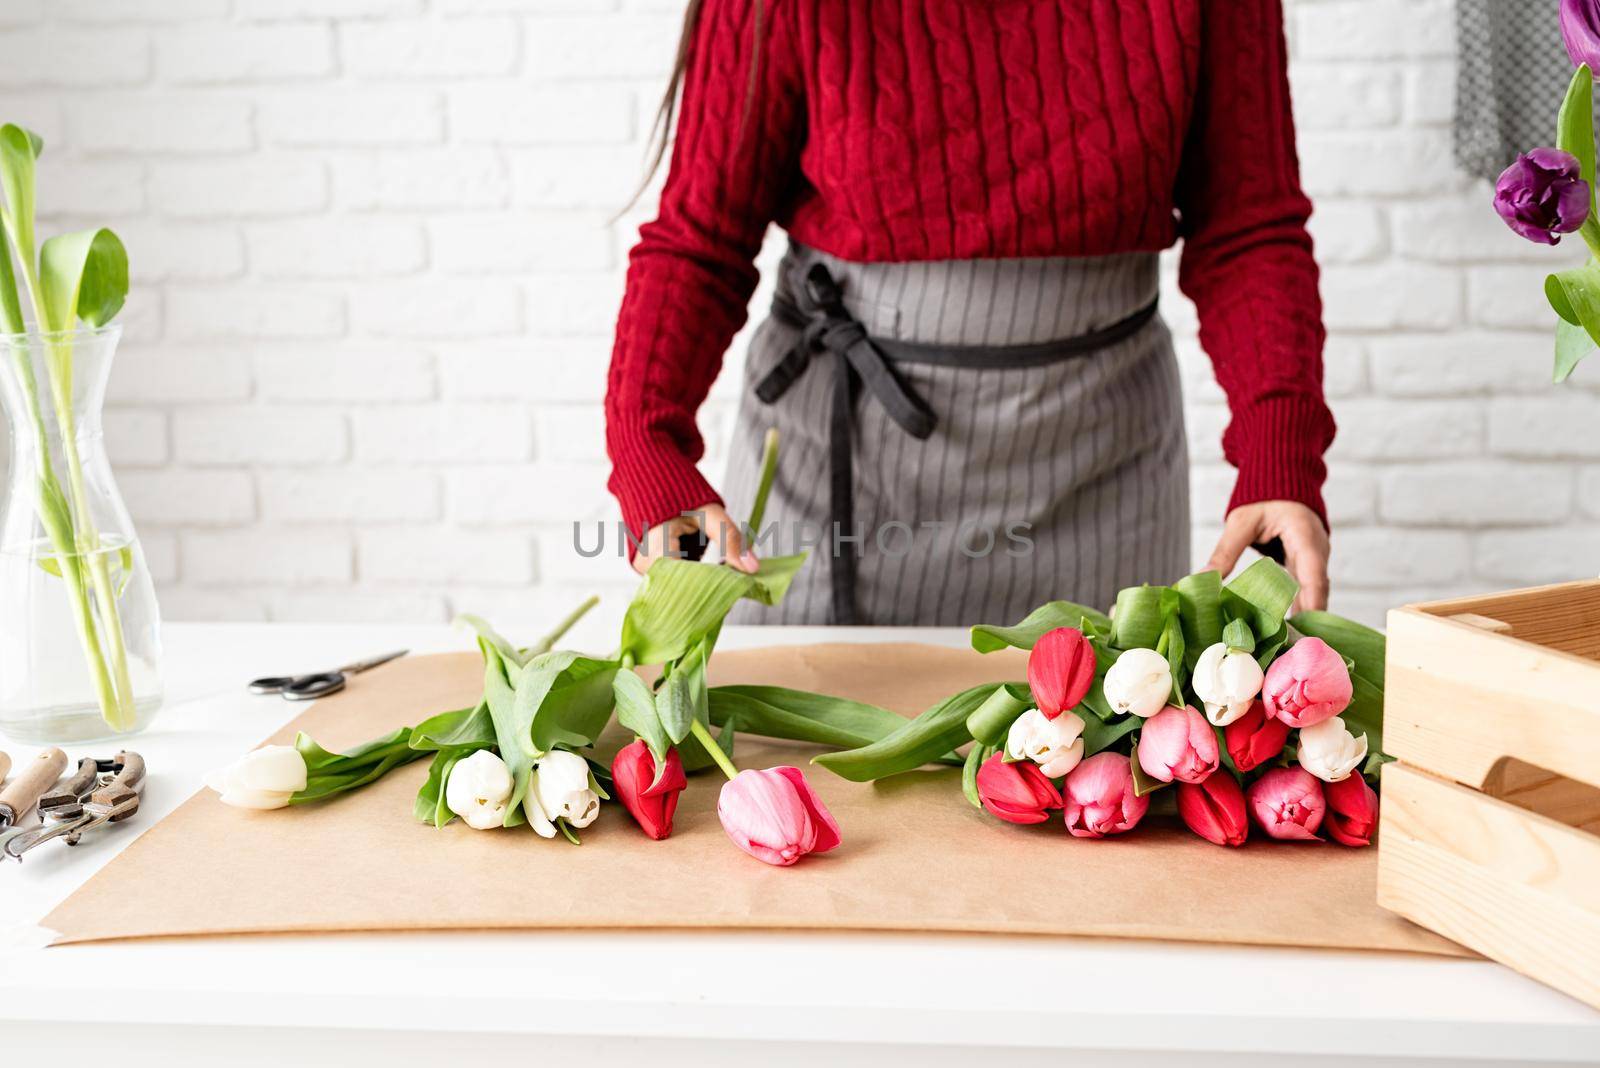 Valentine's Day and Women's Day. Small business. Woman florist making a bouquet of fresh colorful tulips